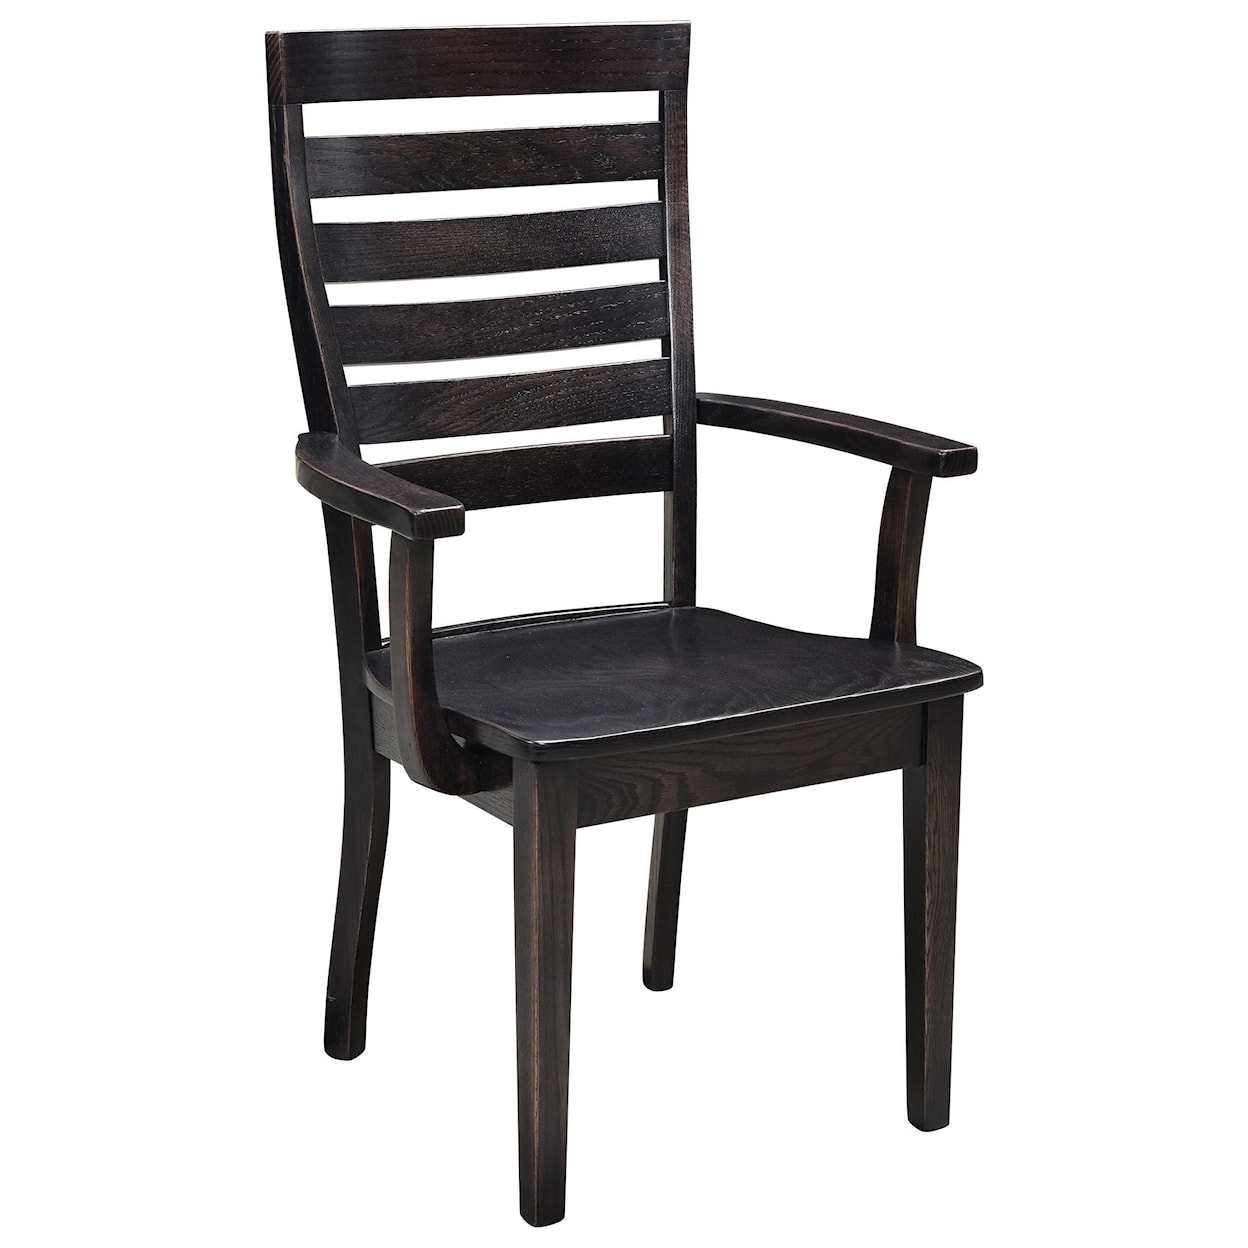 Wengerd Wood Products Wakefield Arm Chair